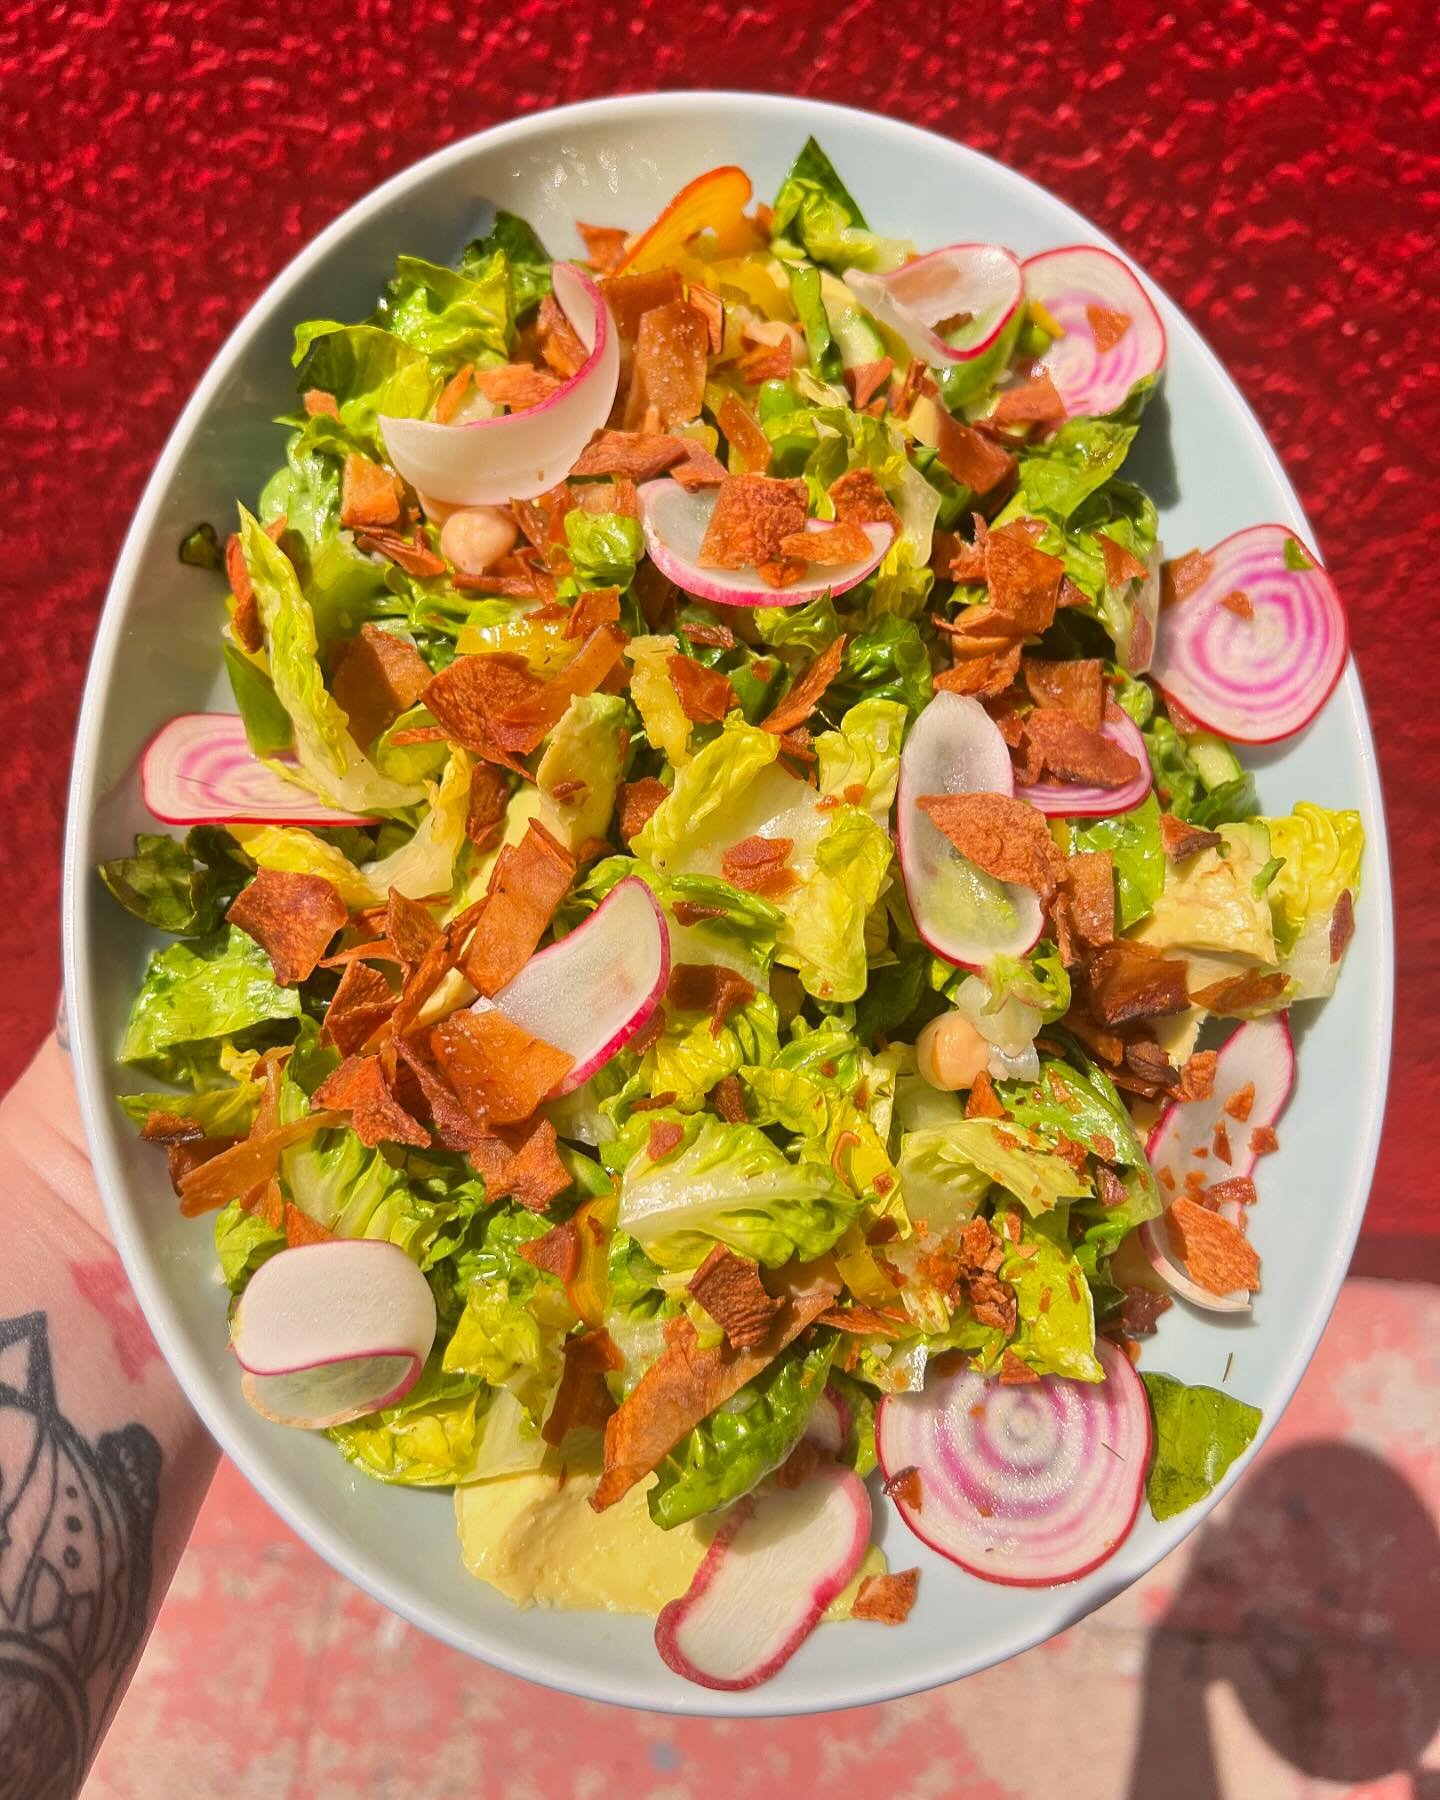 NEW ADB CHOPPED SALAD 🥬🥬 chickpeas, snap peas, asparagus, radish, beets, mushroom bacon, dill vinaigrette &mdash; @chefcatierandazzo brought it to us vegan, but you can add an egg, you can add some chicken &mdash; should your buds desire 🎈👅🎈🎈🎈